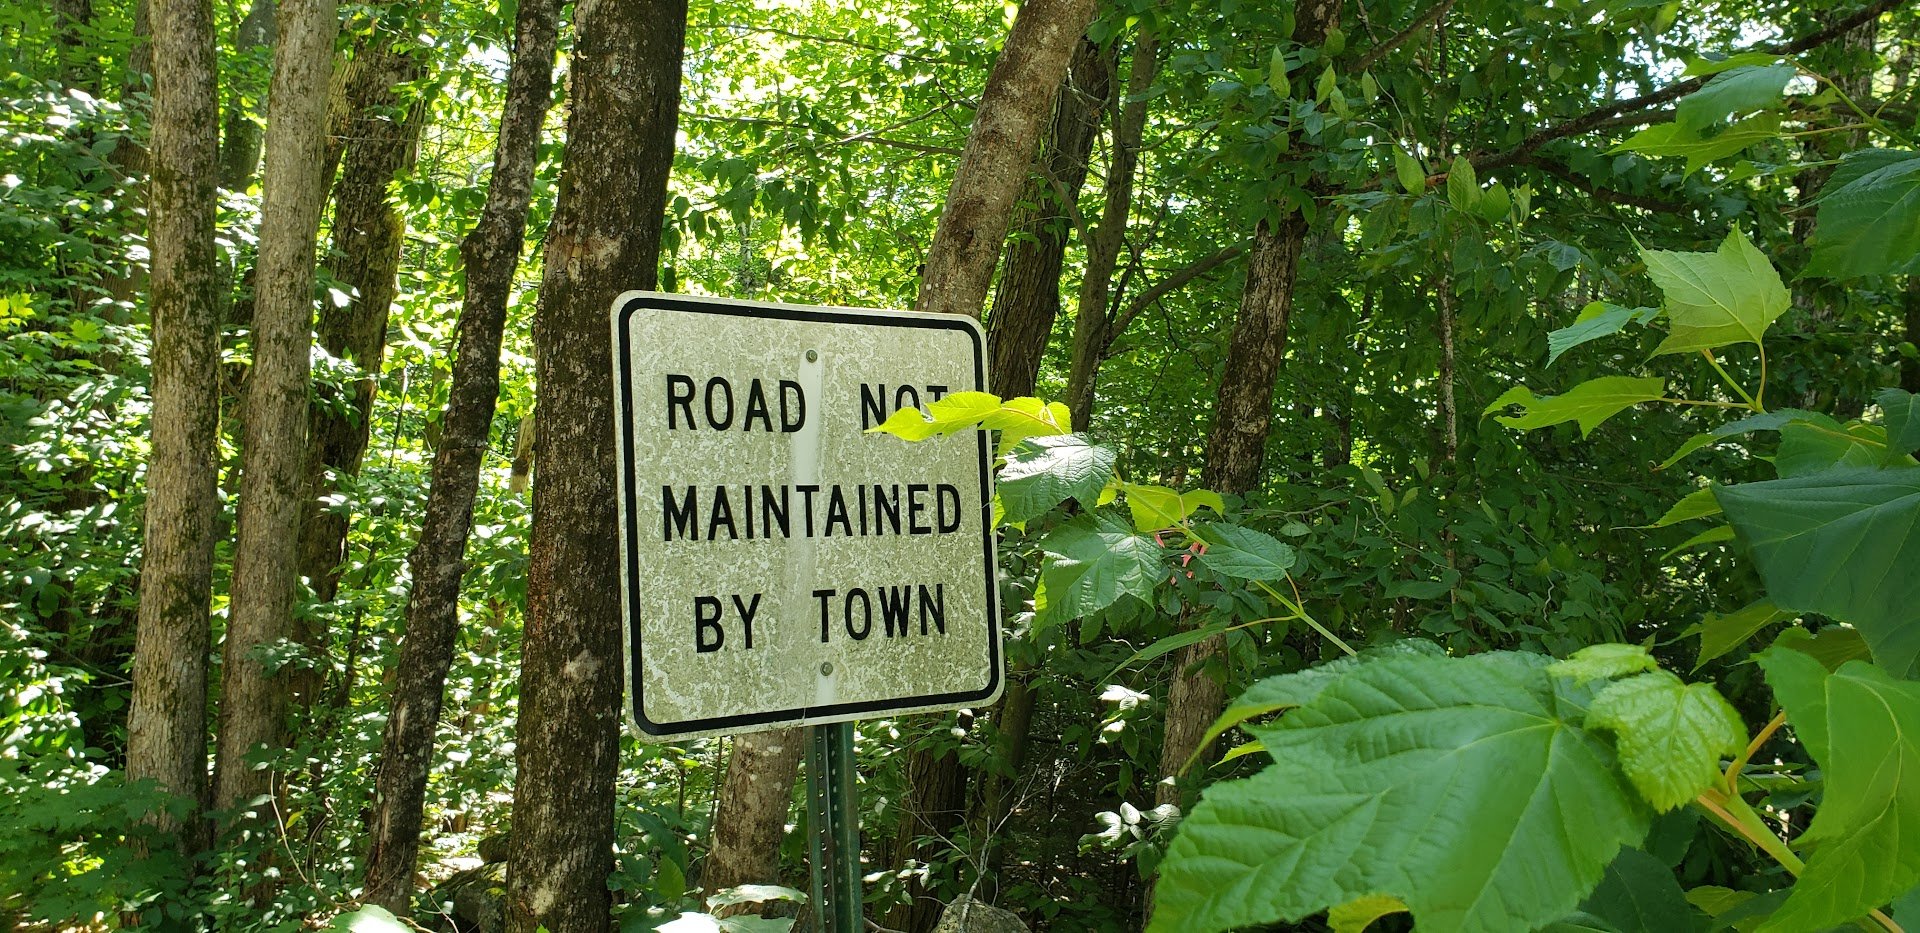 Road not maintained by town sign image by John Goreham